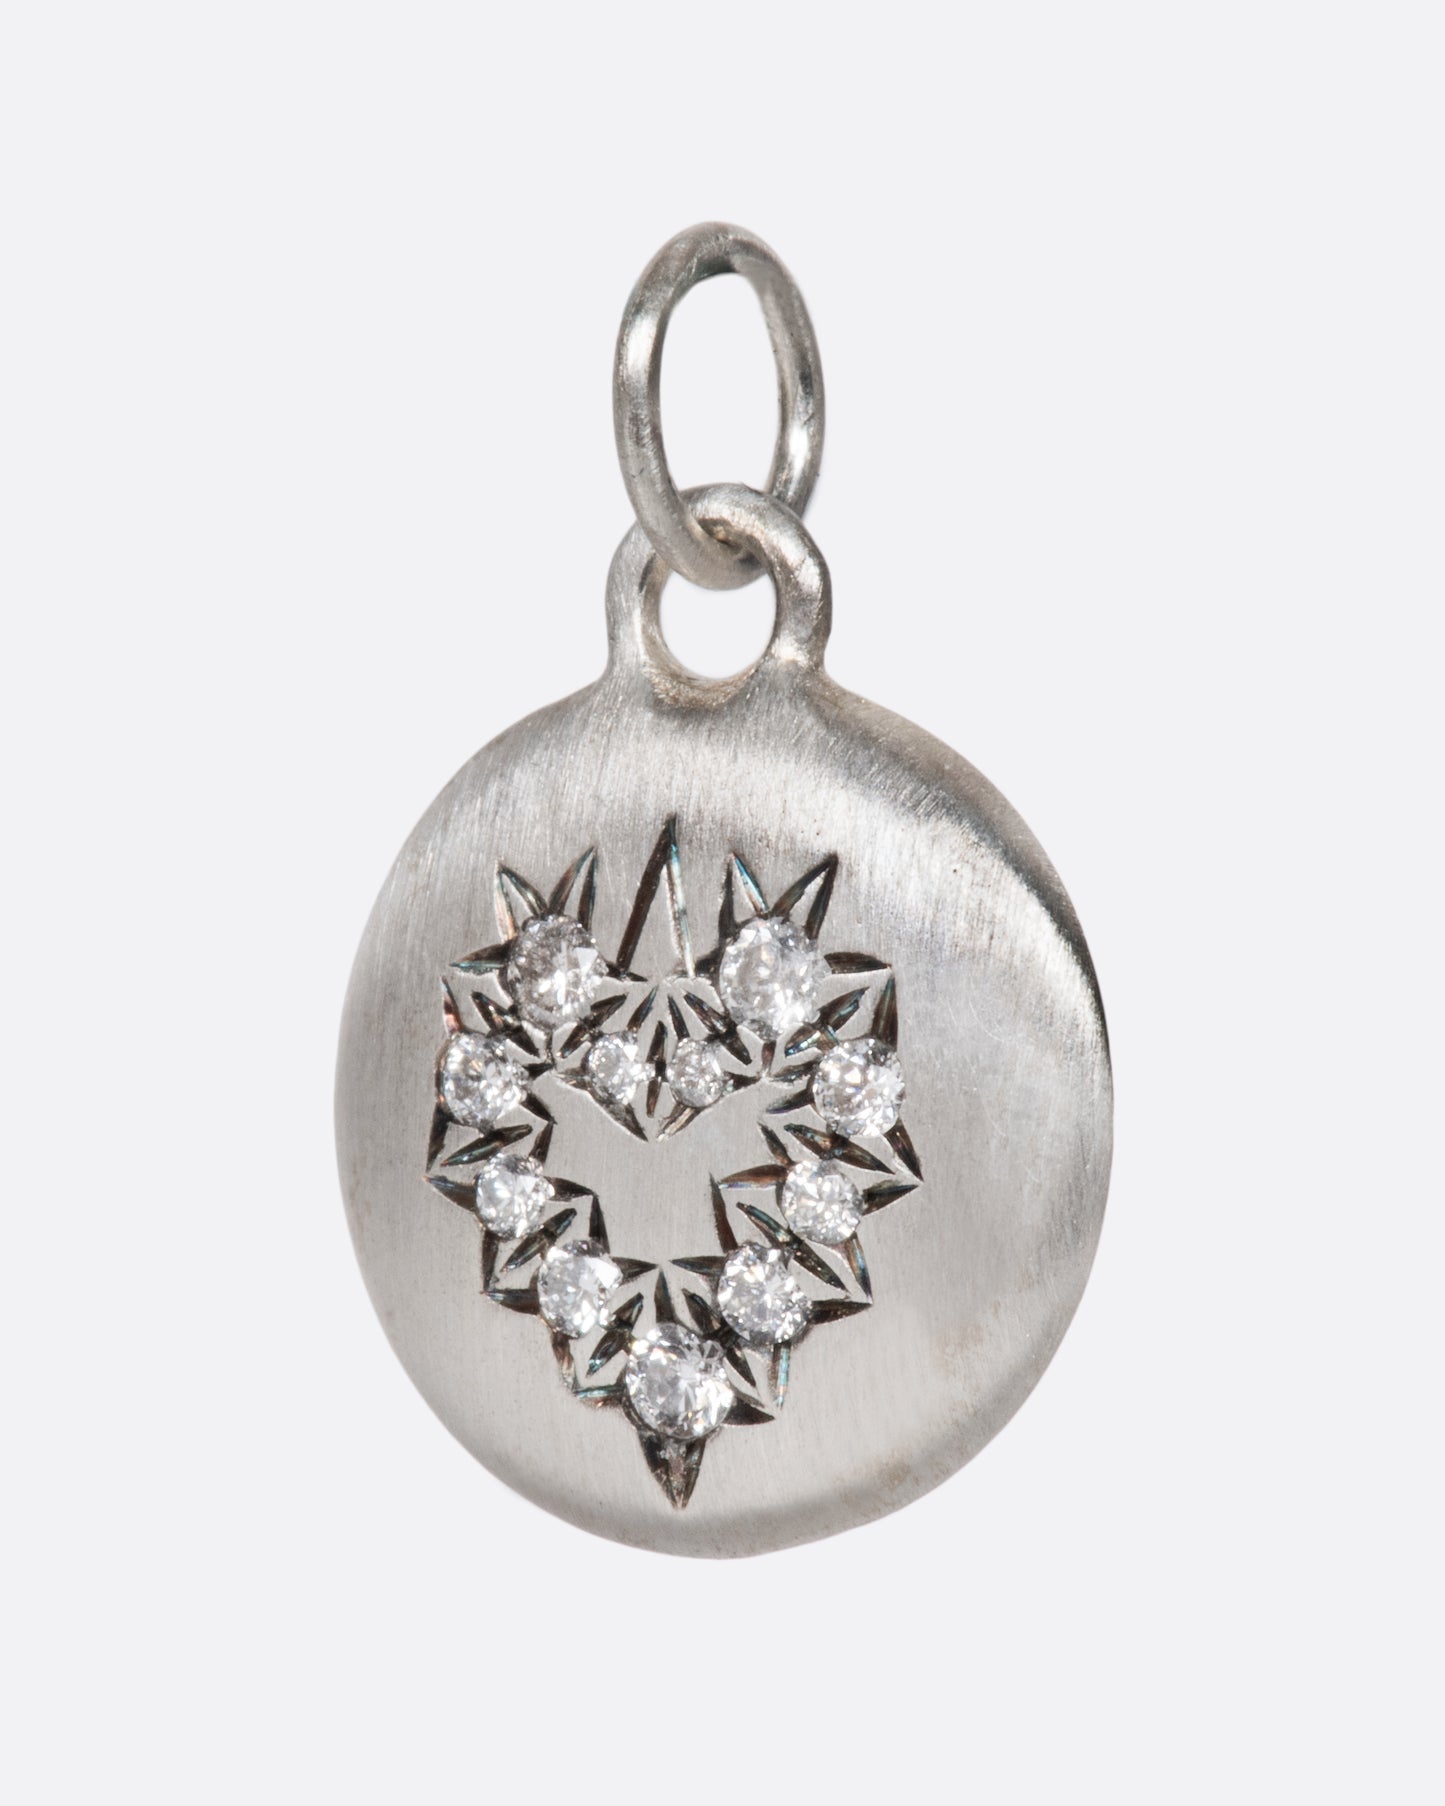 A beautiful sterling silver heart charm with striking, high quality grey diamonds surrounded by angular etching that makes them pop